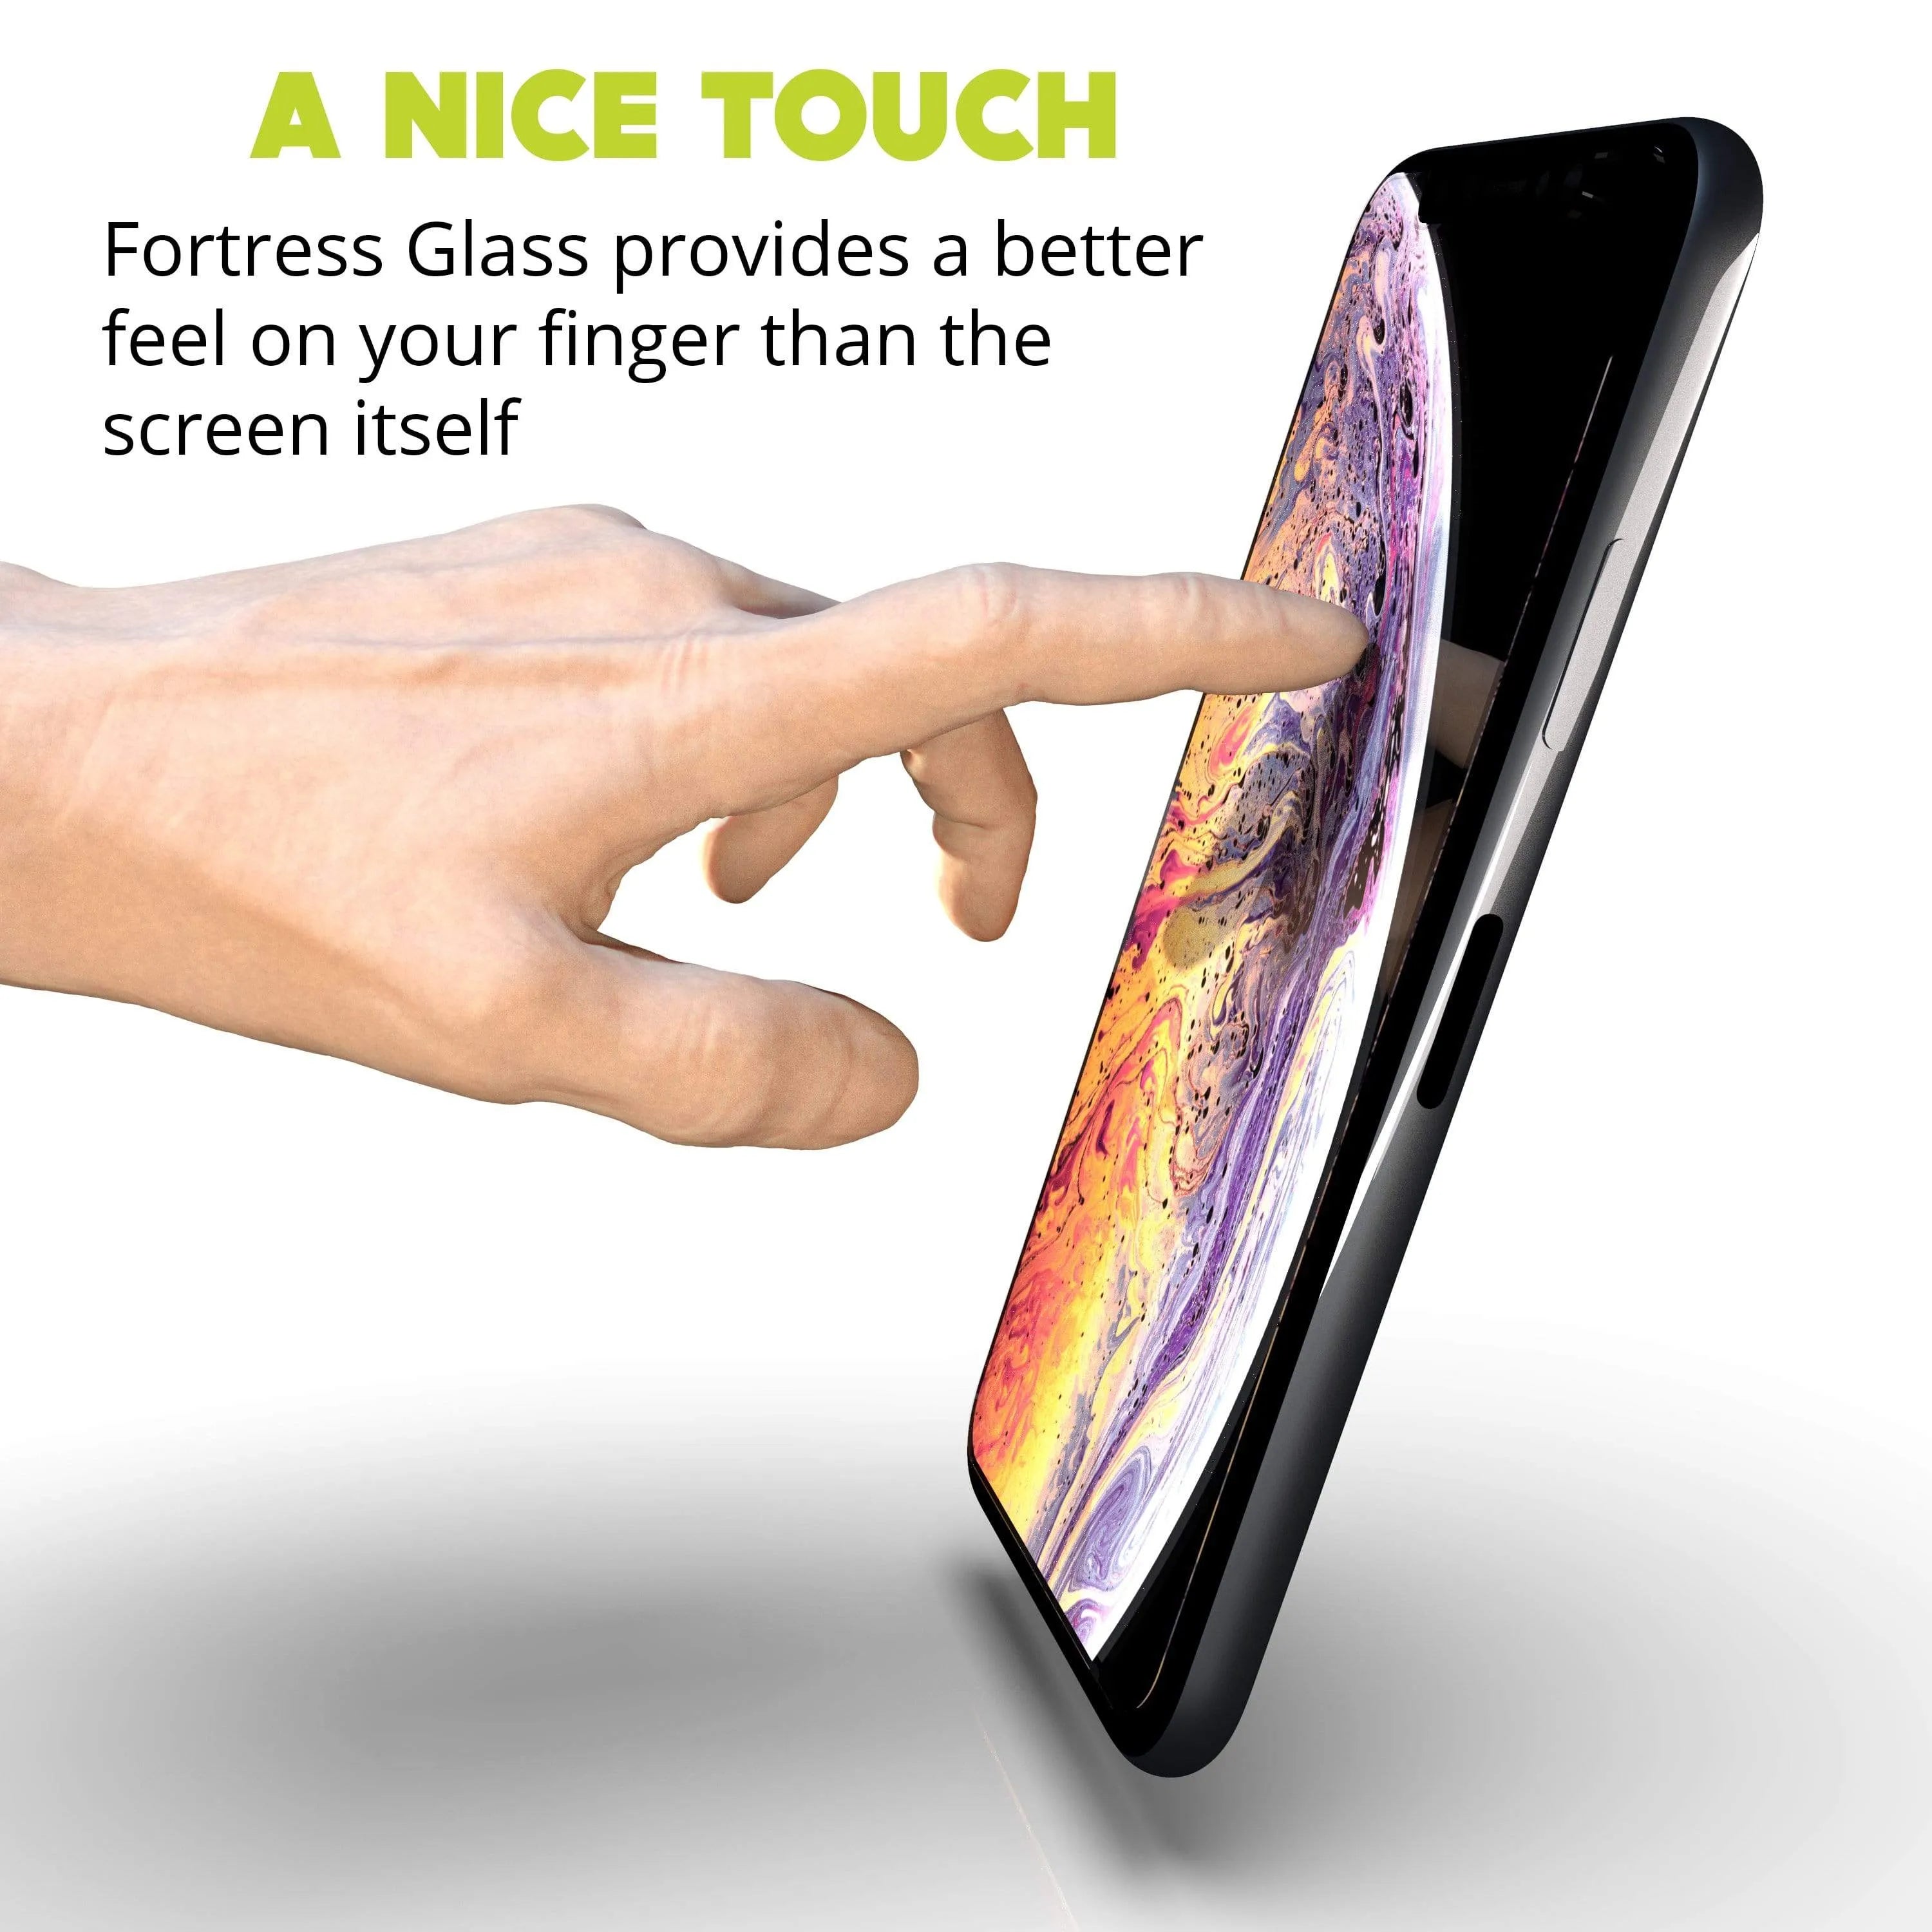 Fortress iPhone XS Screen Protector - $200 Device Coverage  Scooch Screen Protector